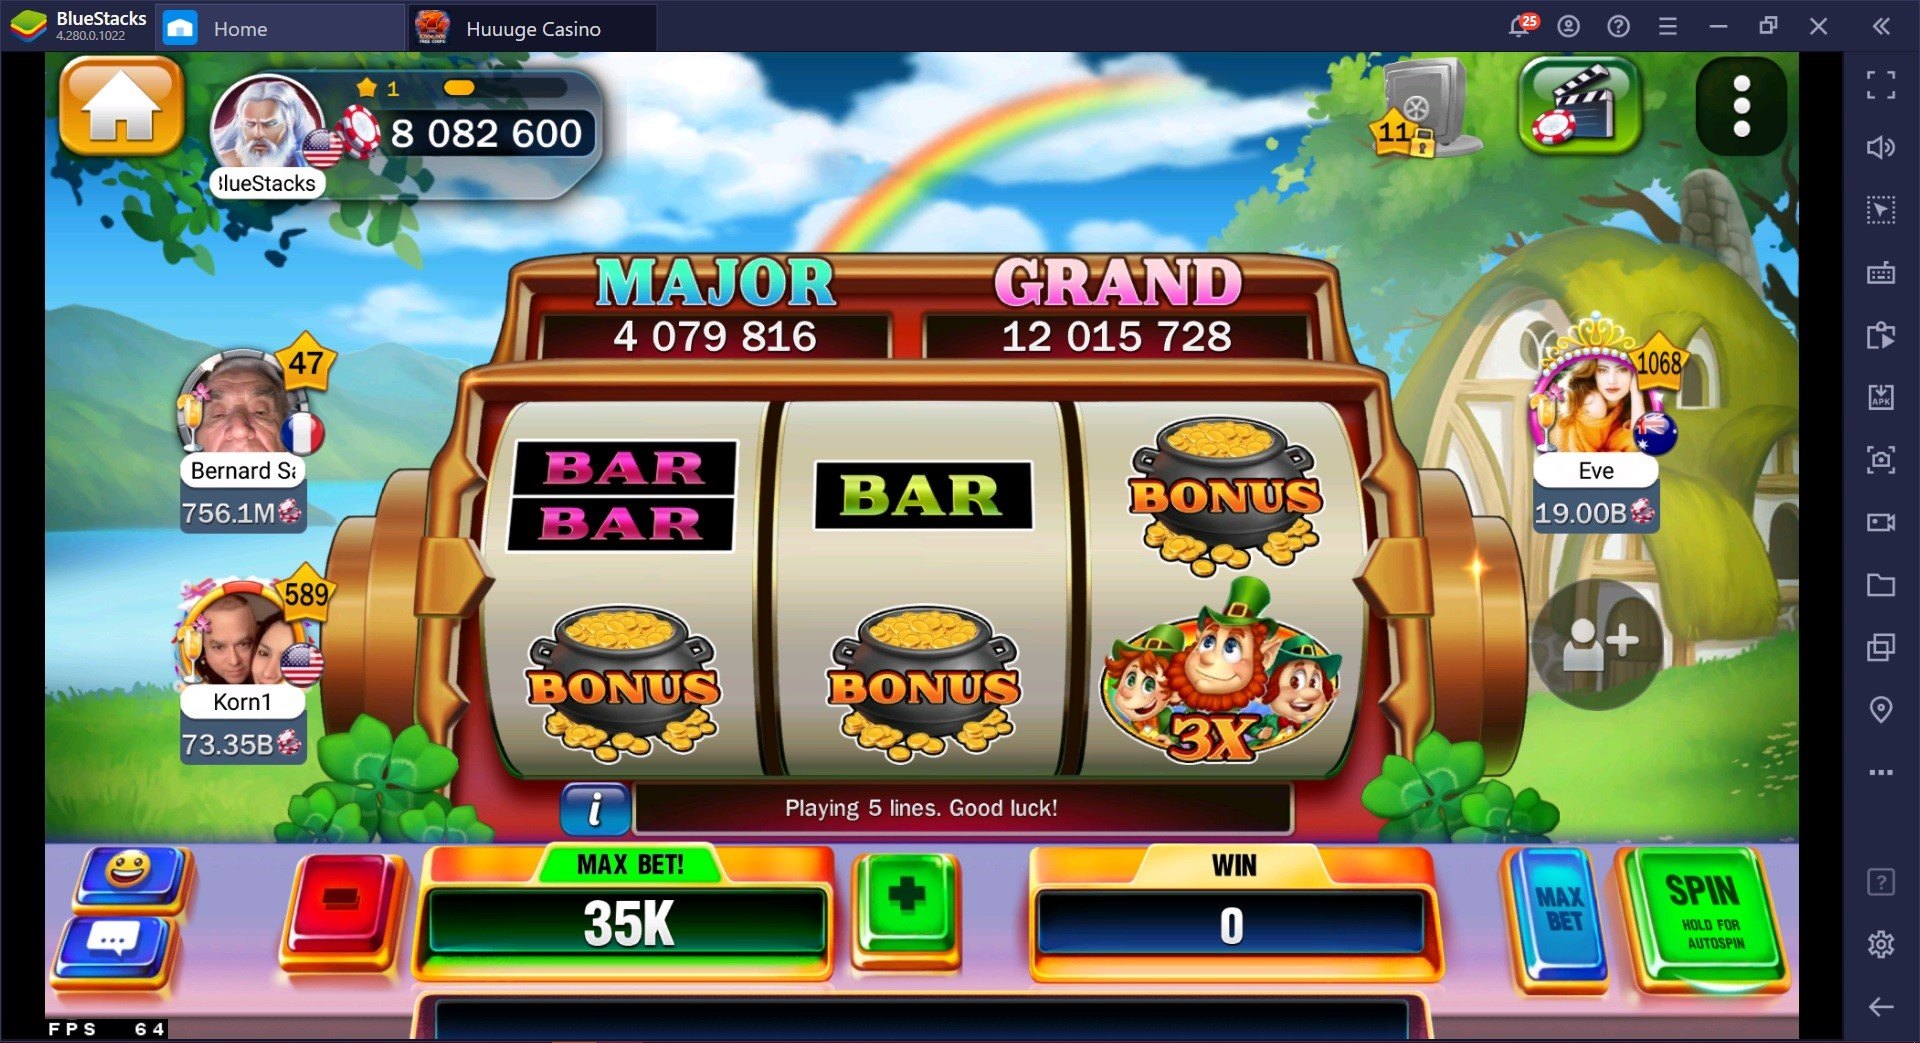 How to play Huuuge Casino Slots on PC with BlueStacks